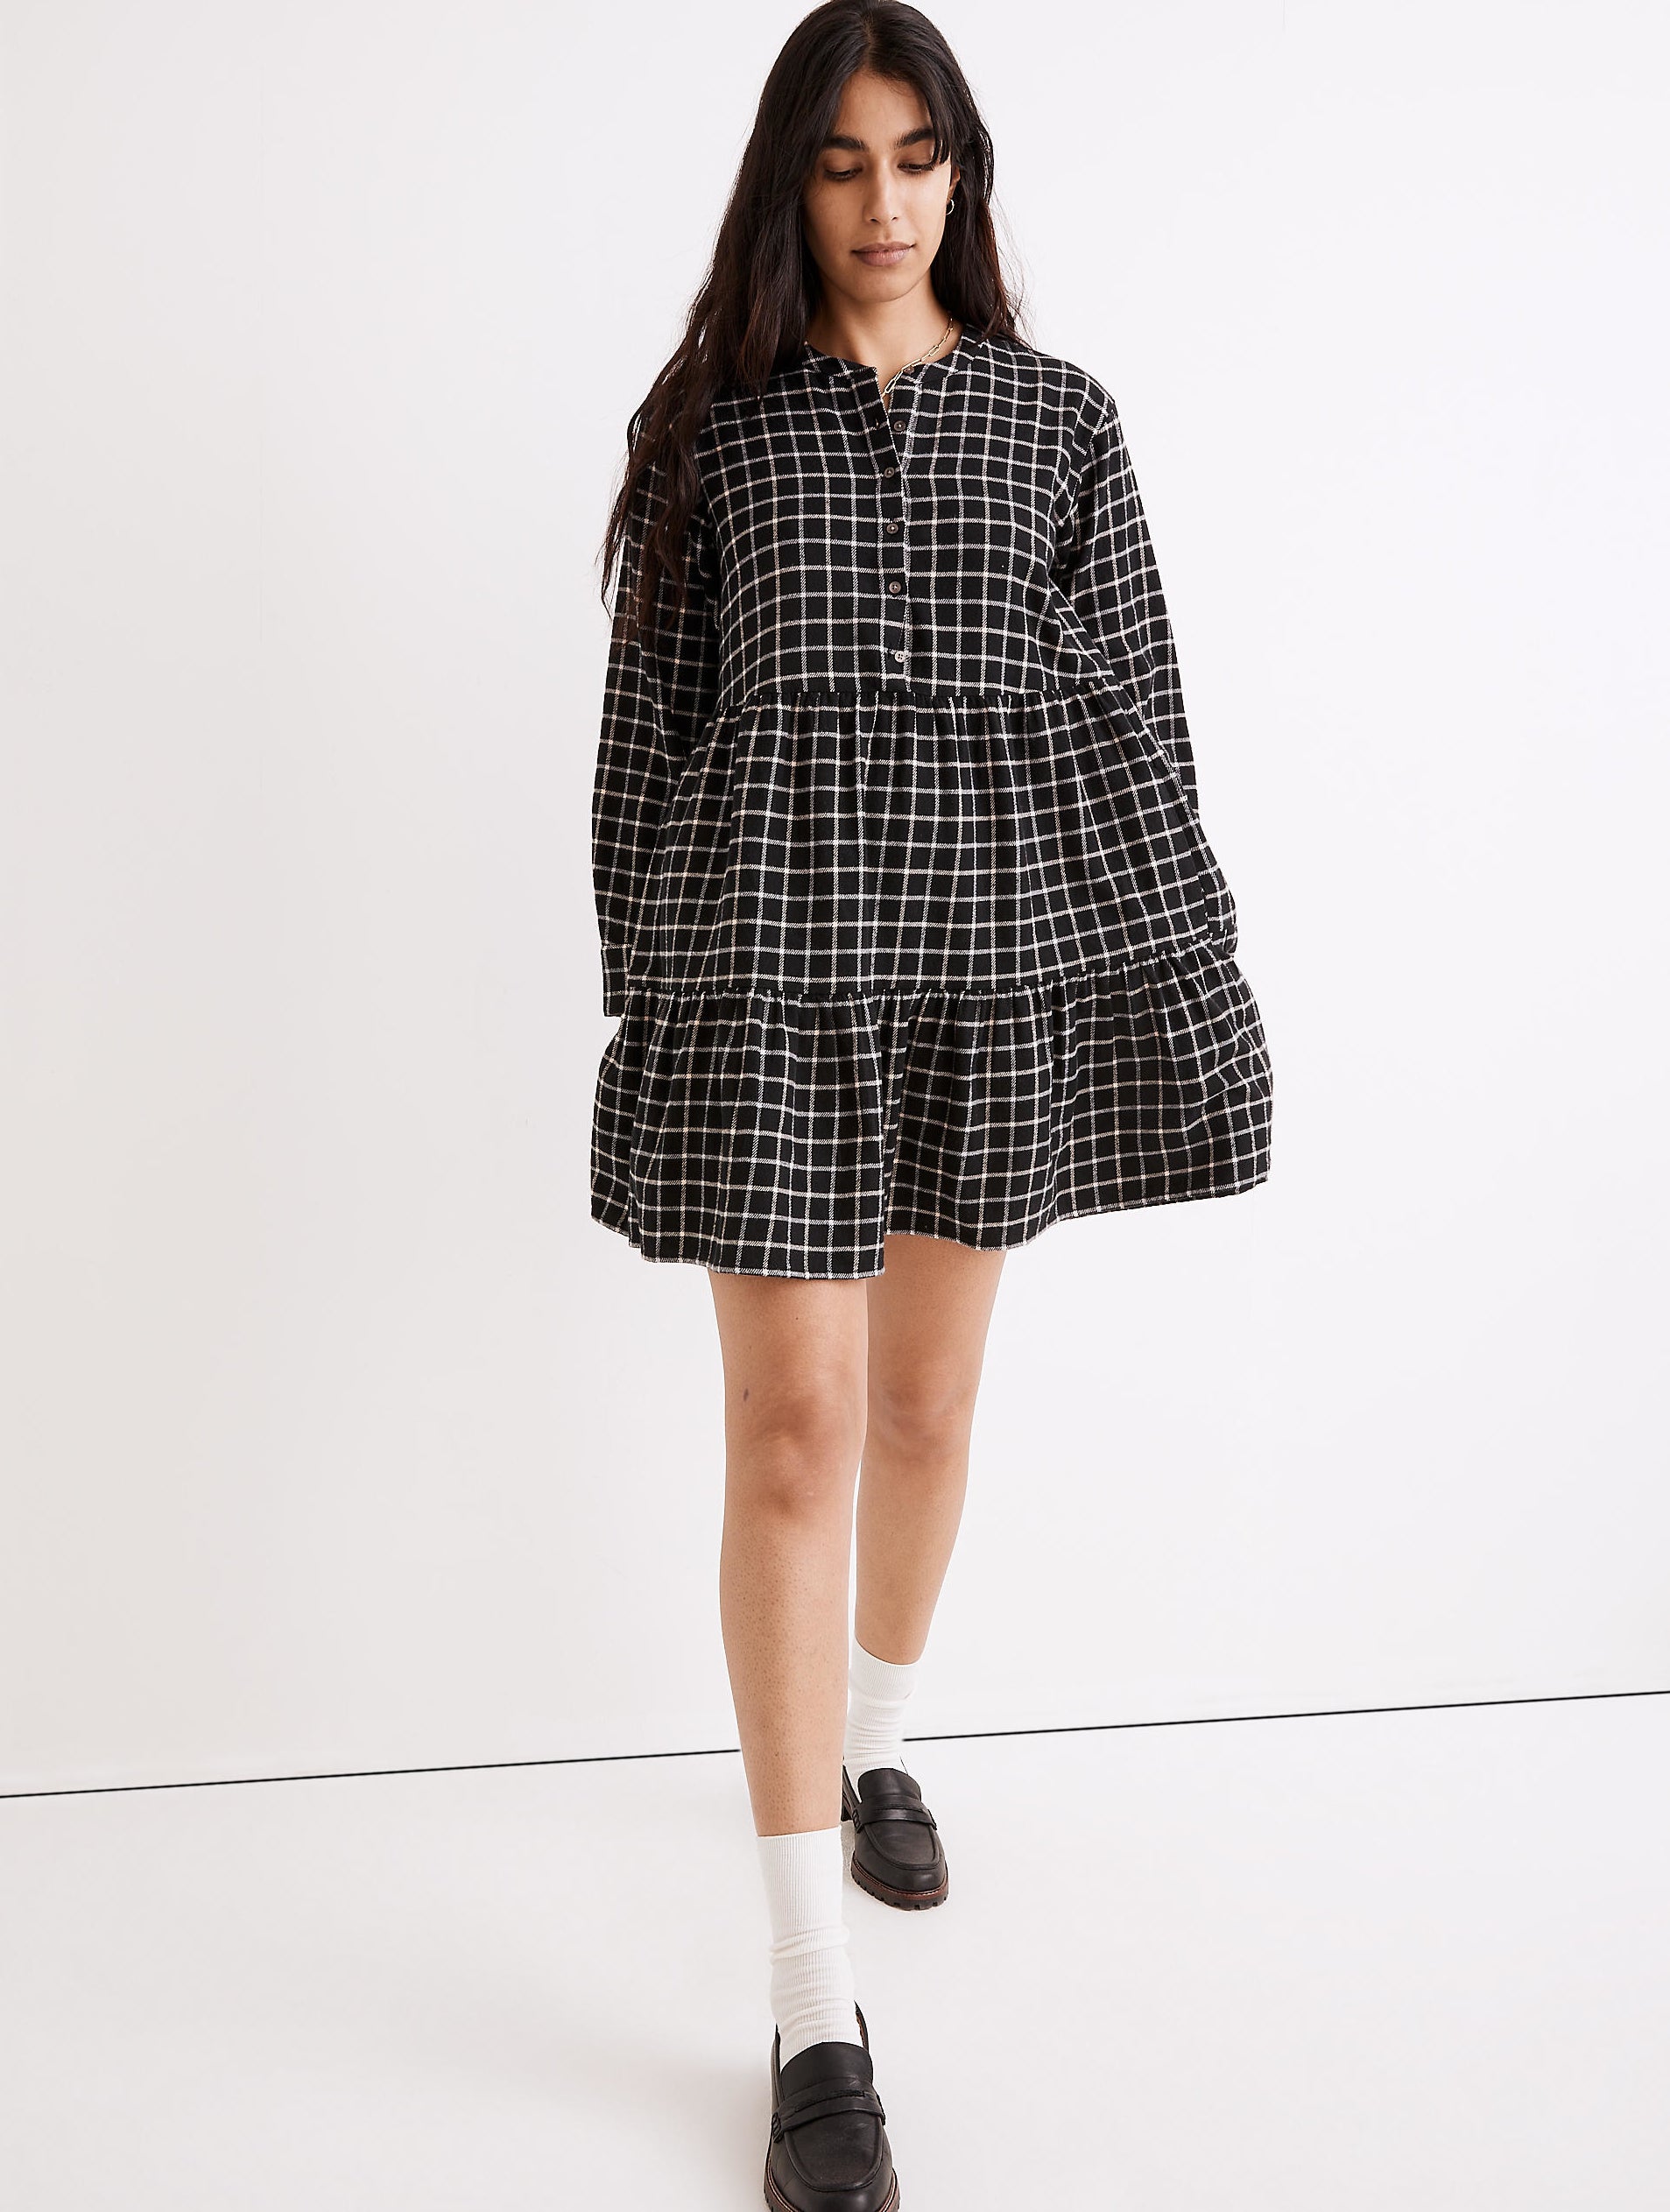 model in a short tiered black dress with a thin white checker pattern